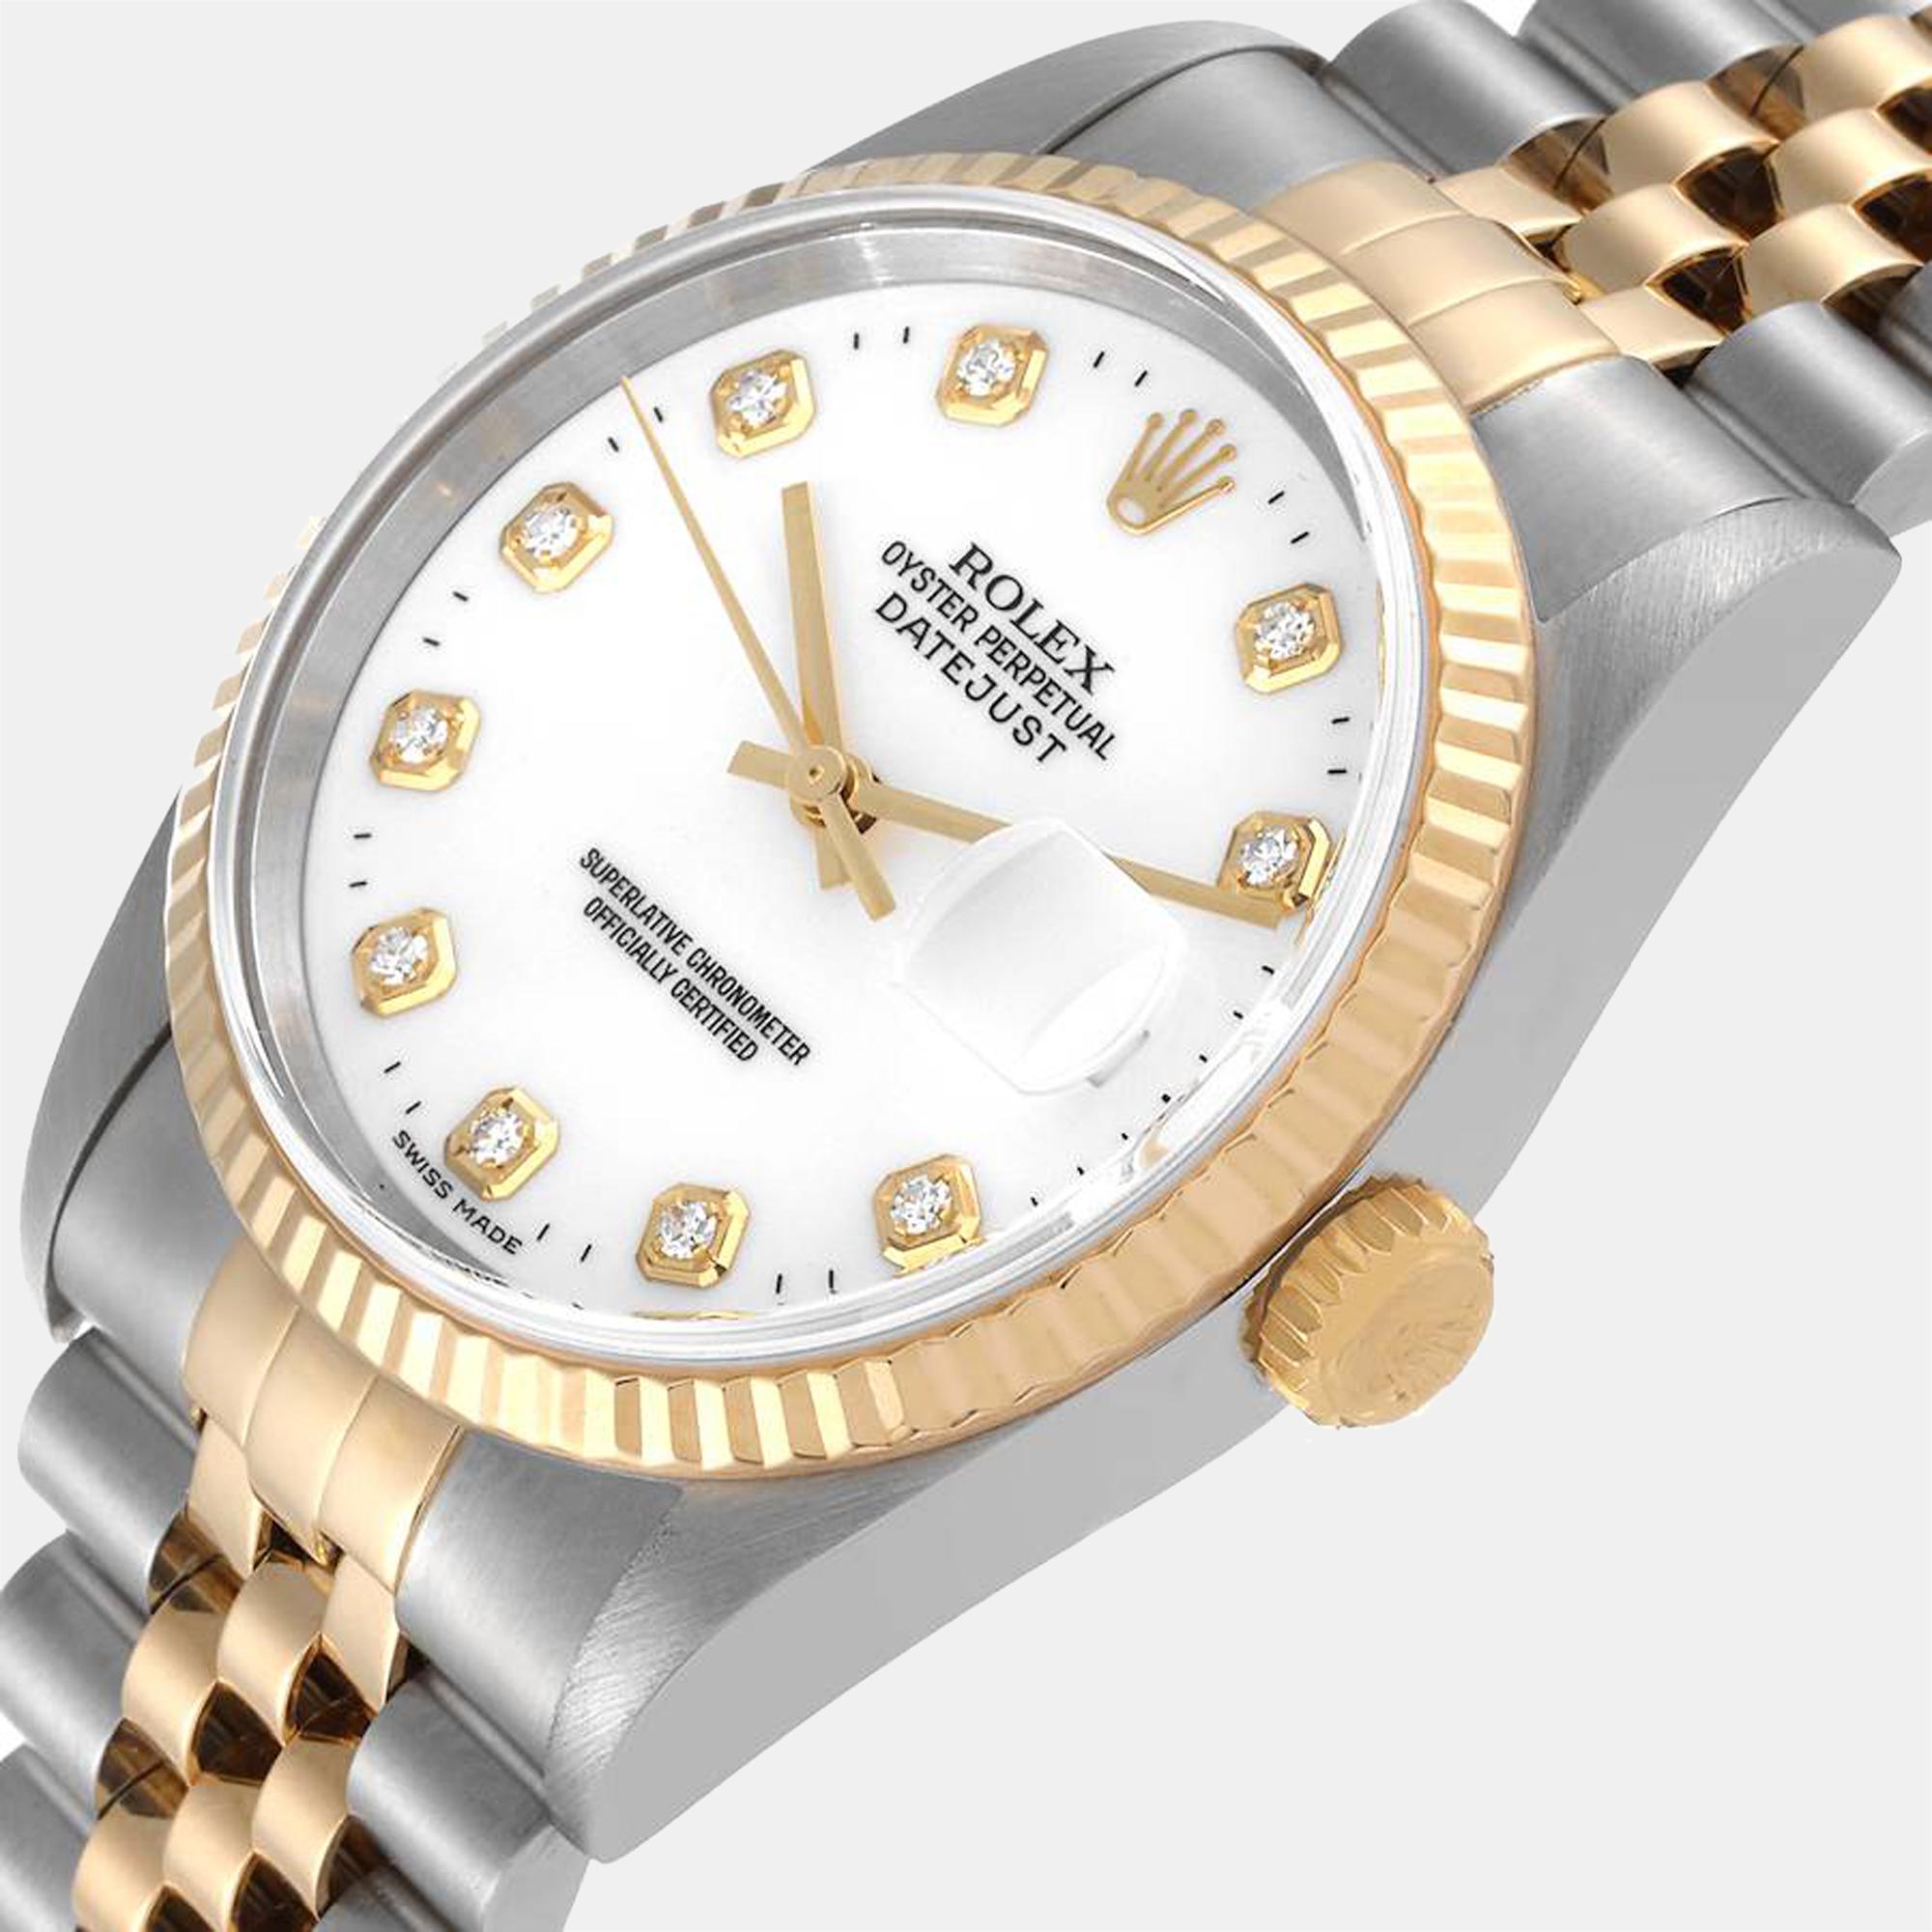 Brand: Rolex
Model Name: Datejust
Model Number: 16233
Movement: Mechanical Automatic
Case Size: 36 mm
Case Material: Yellow Gold & Stainless Steel
Bracelet: Jubilee
Dial: White with Diamond Hour Markers
Year: X Serial - 1991
Condition: Good